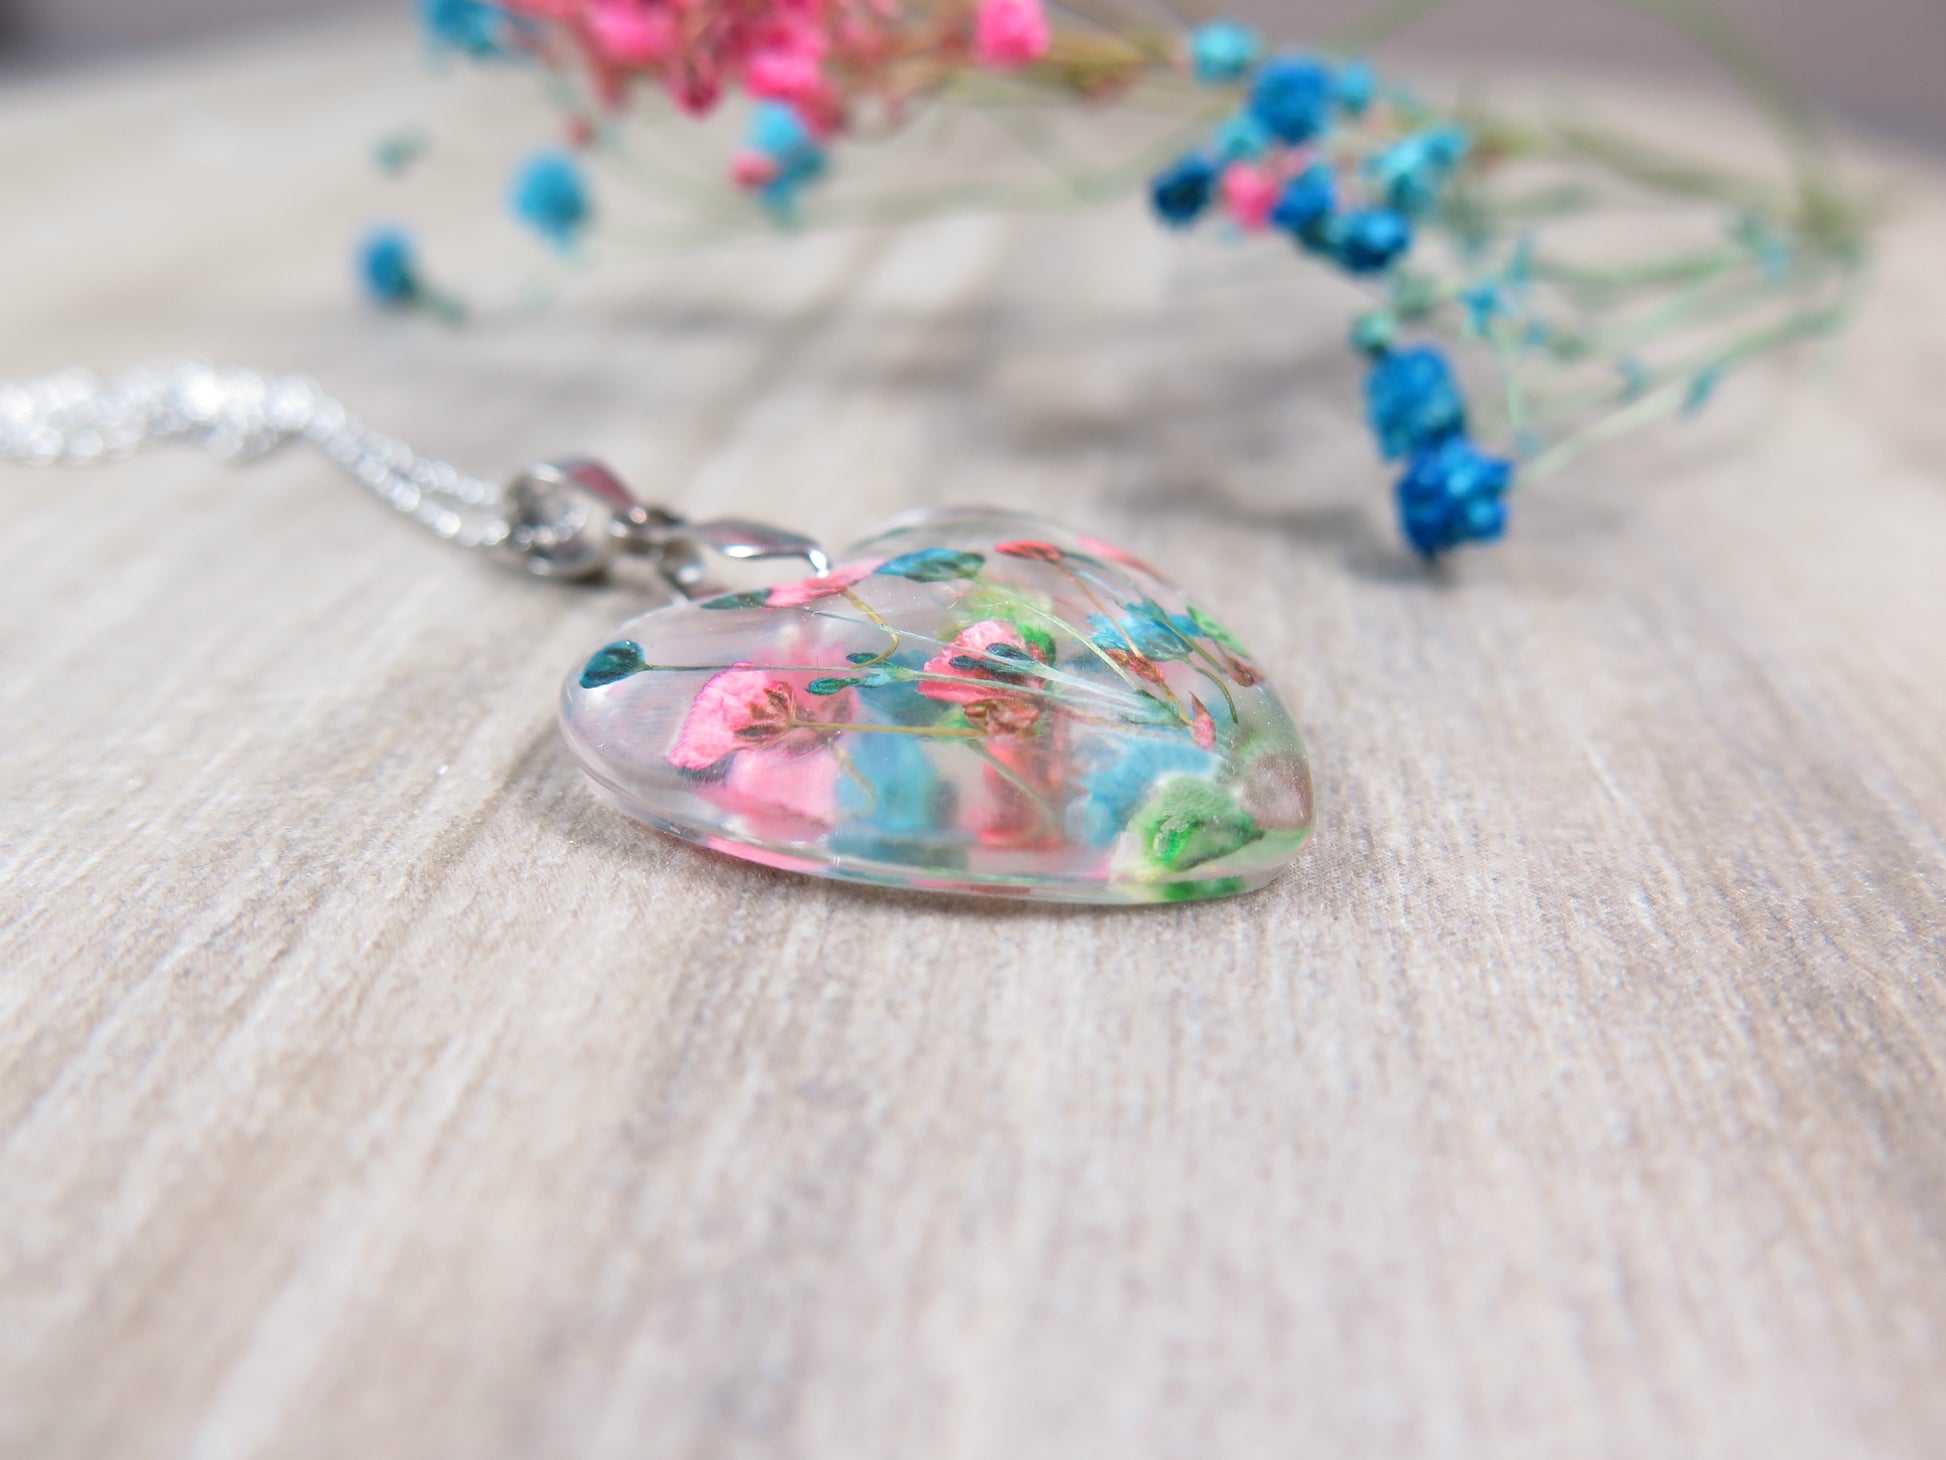 Pink Flower Glass Necklace